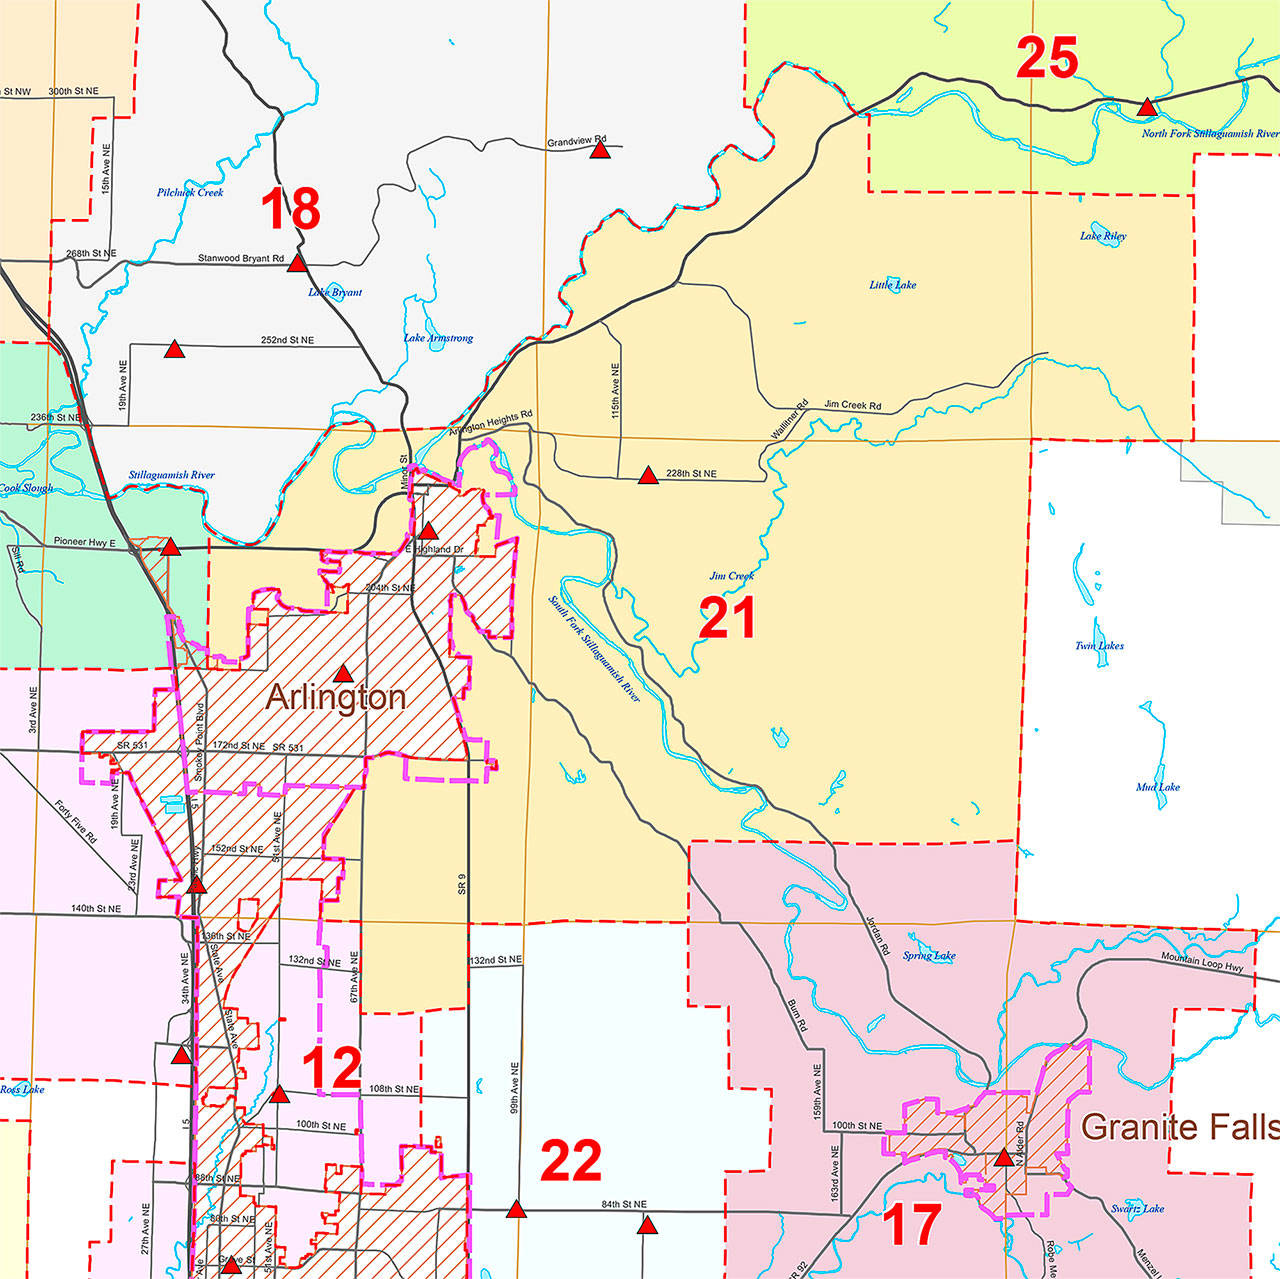 Snohomish County Fire District 21 encompasses 70 square miles. (Snohomish County)